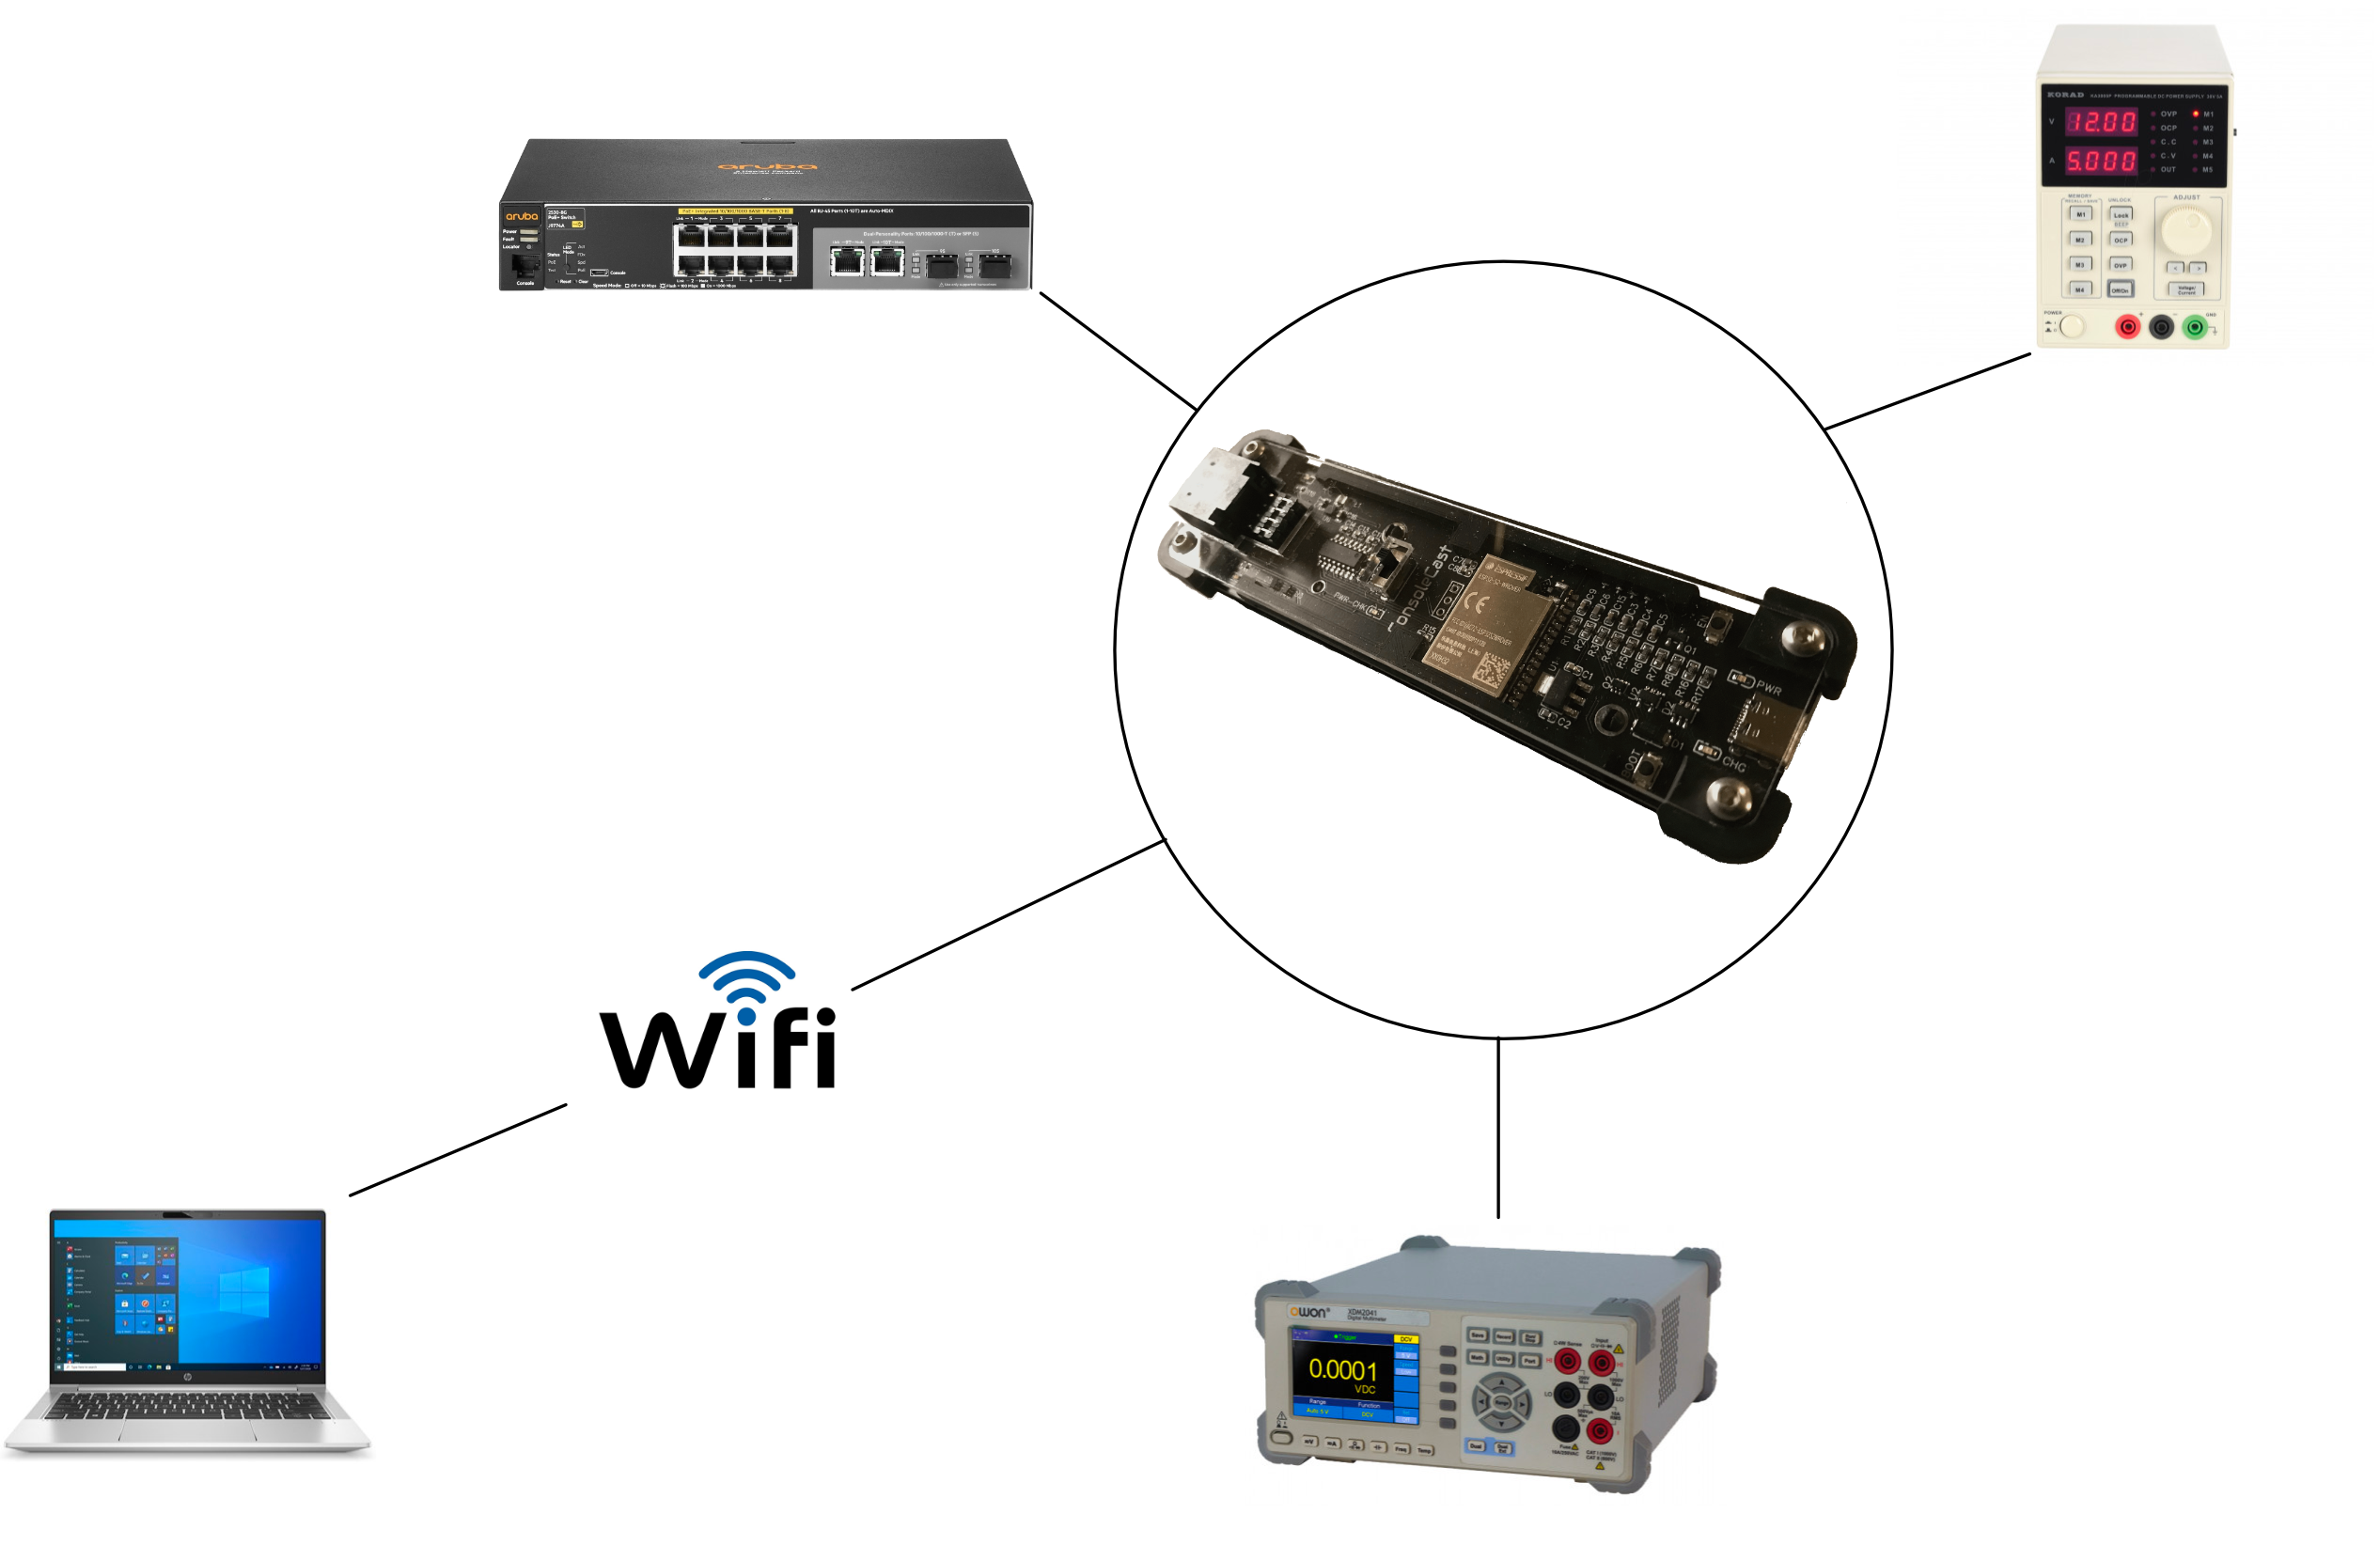 Connect over Wifi